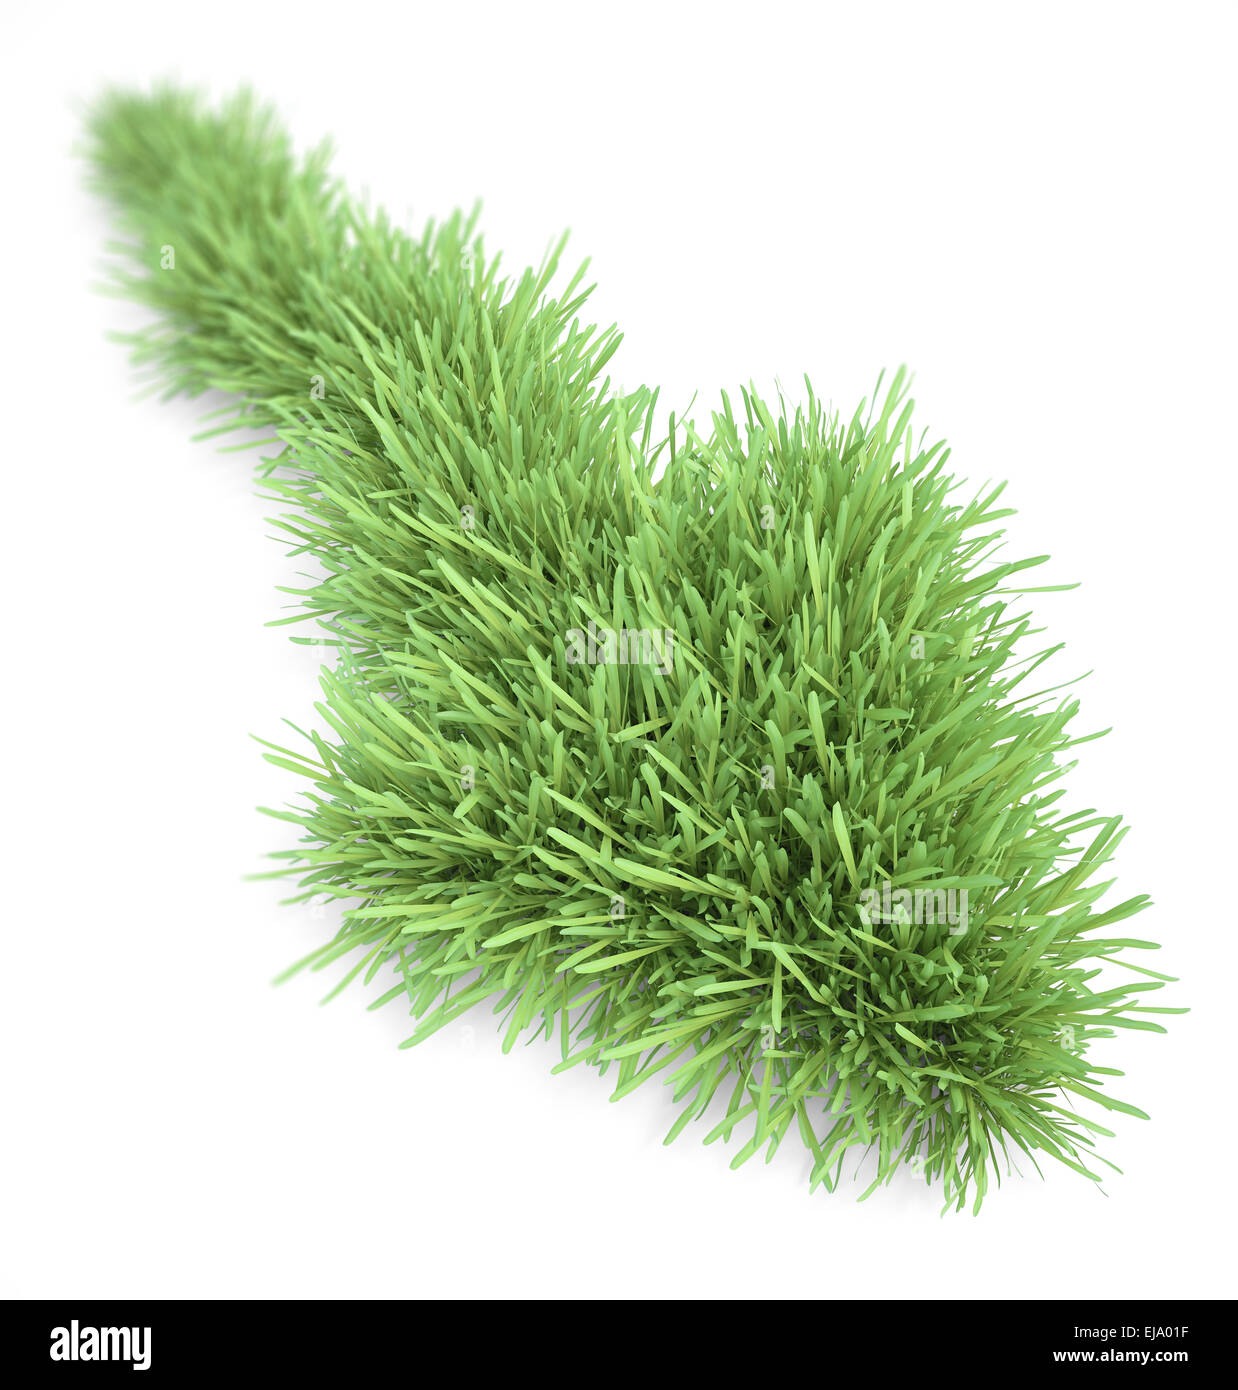 An arrow symbol made out of a patch of grass Stock Photo